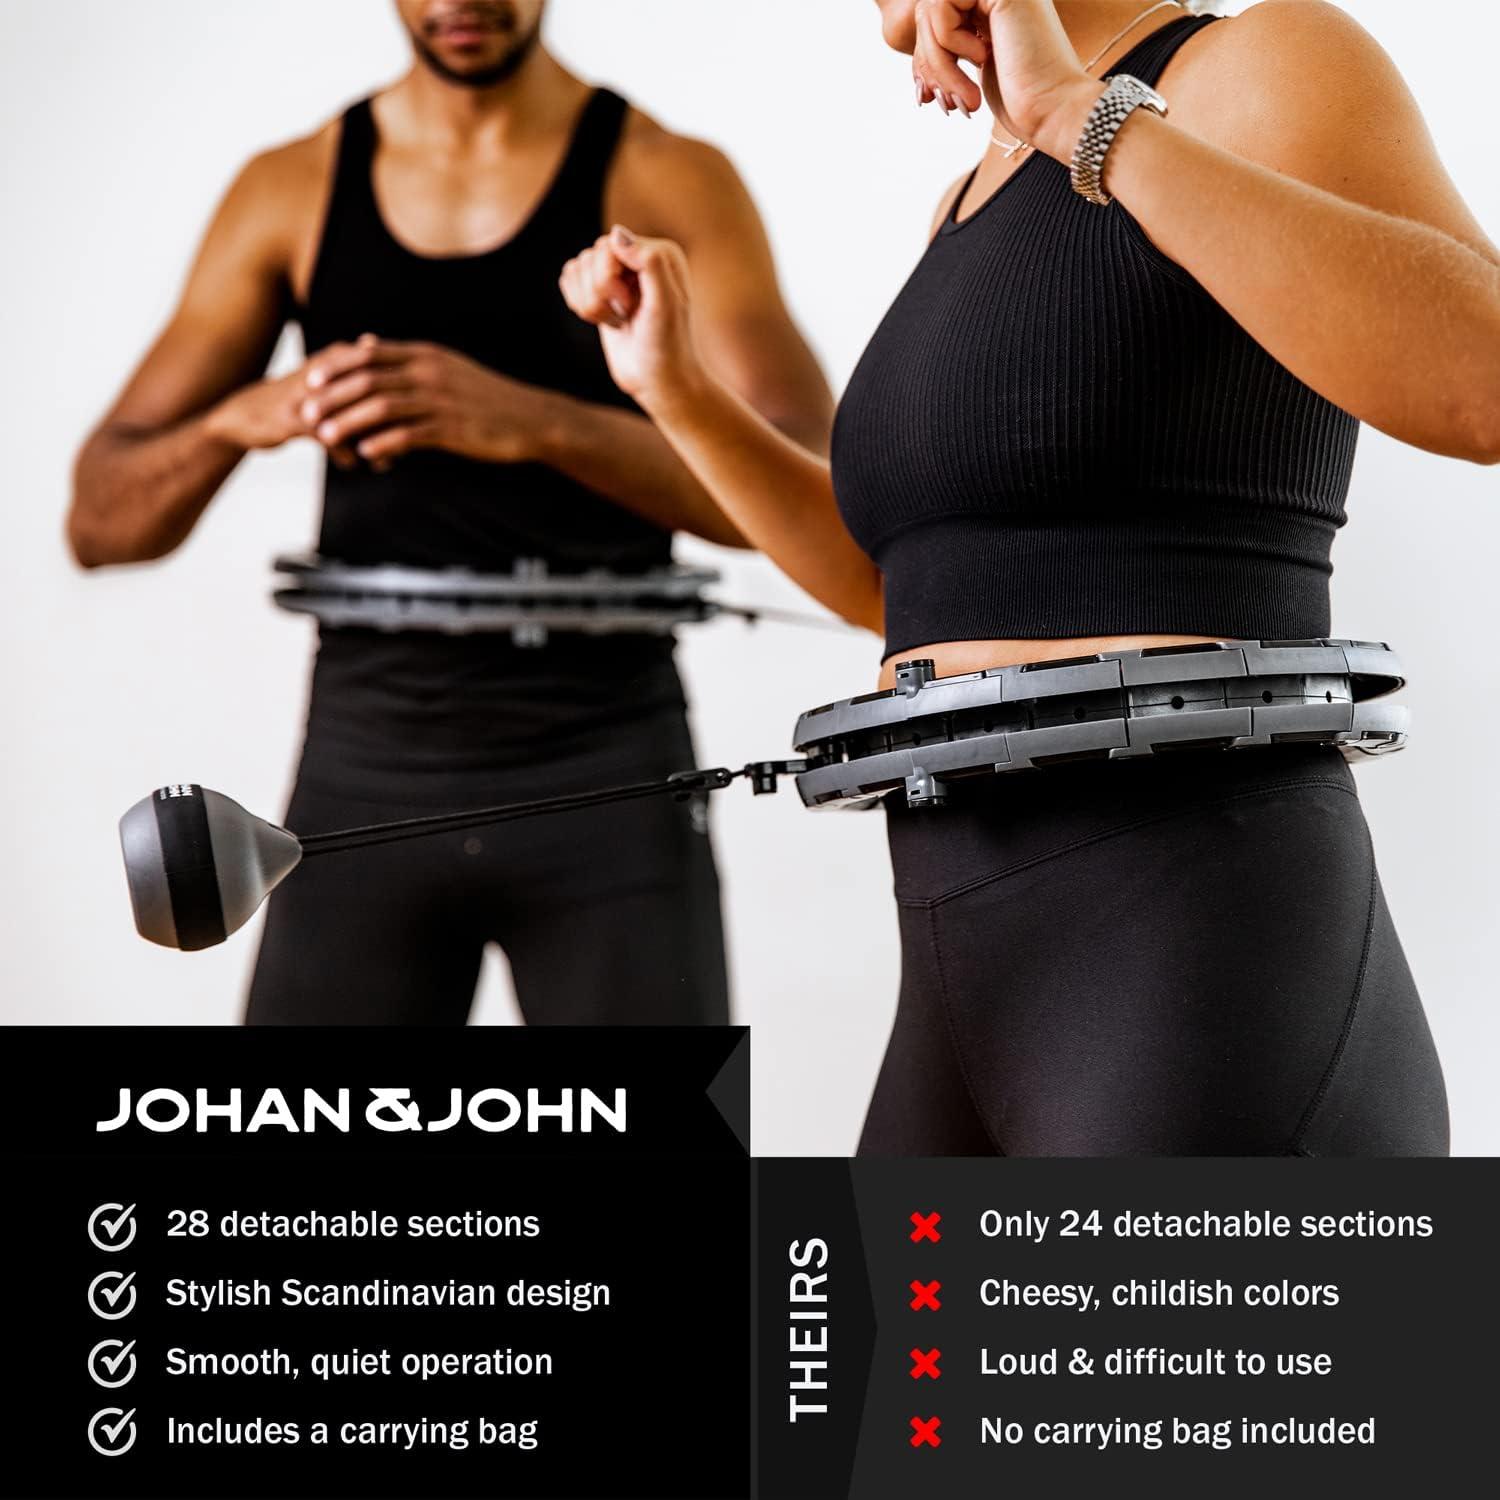  Johan & John Smart Weighted Hula Hoop, Infinity Hoop for  Adults Weight Loss, Kids, Plus Size - Fitness & Exercise Ring with 28  Detachable Knots - Scandinavian Design, Carrying Bag